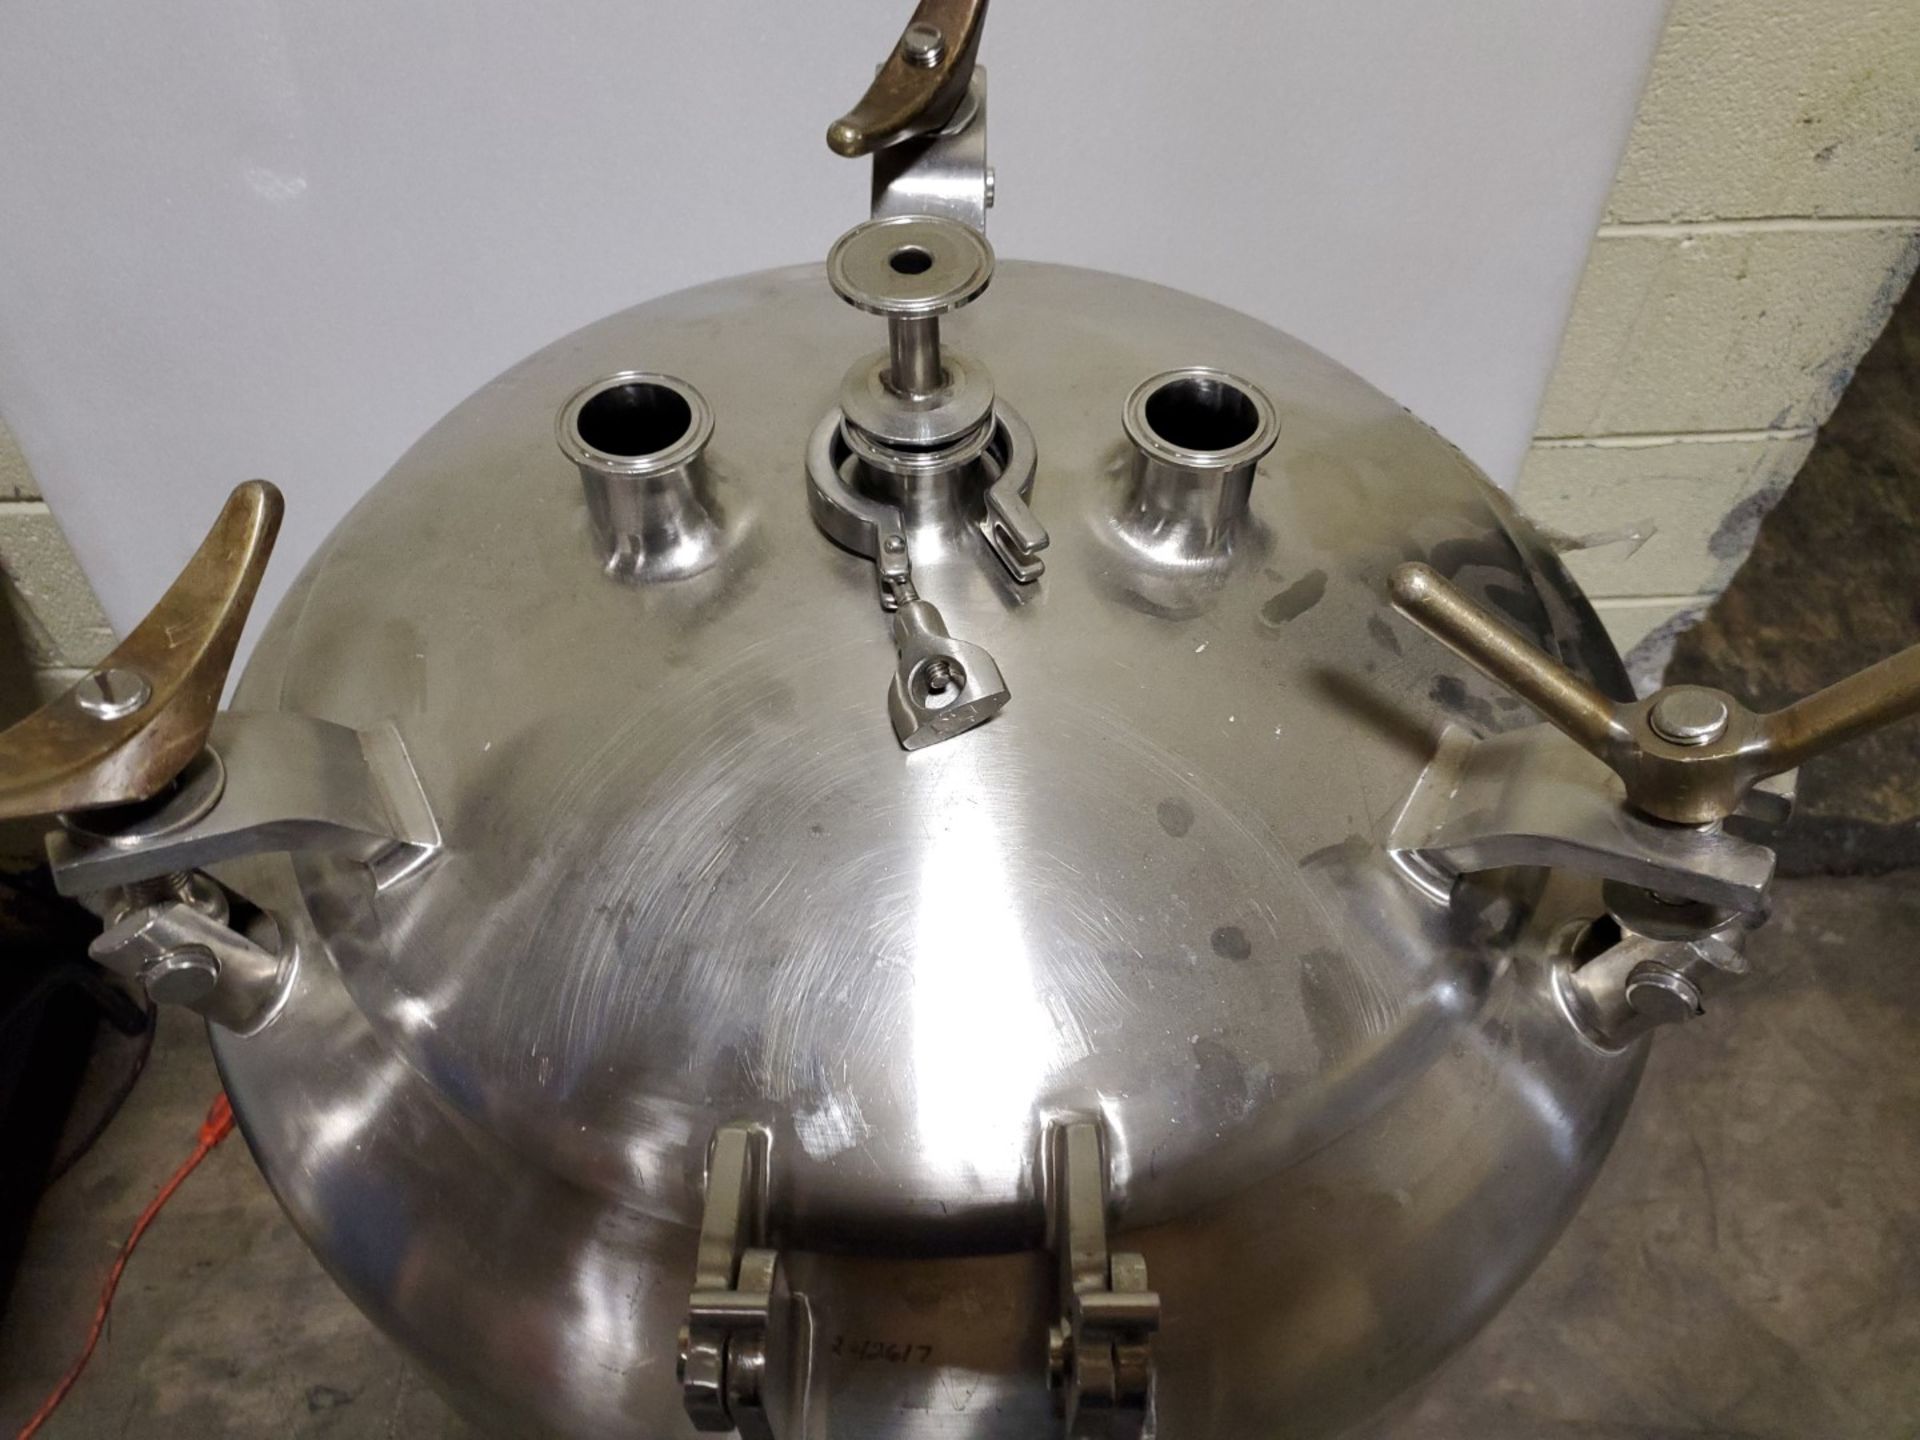 Letsch stainless steel pressure vessel 316L S/S - Image 4 of 6